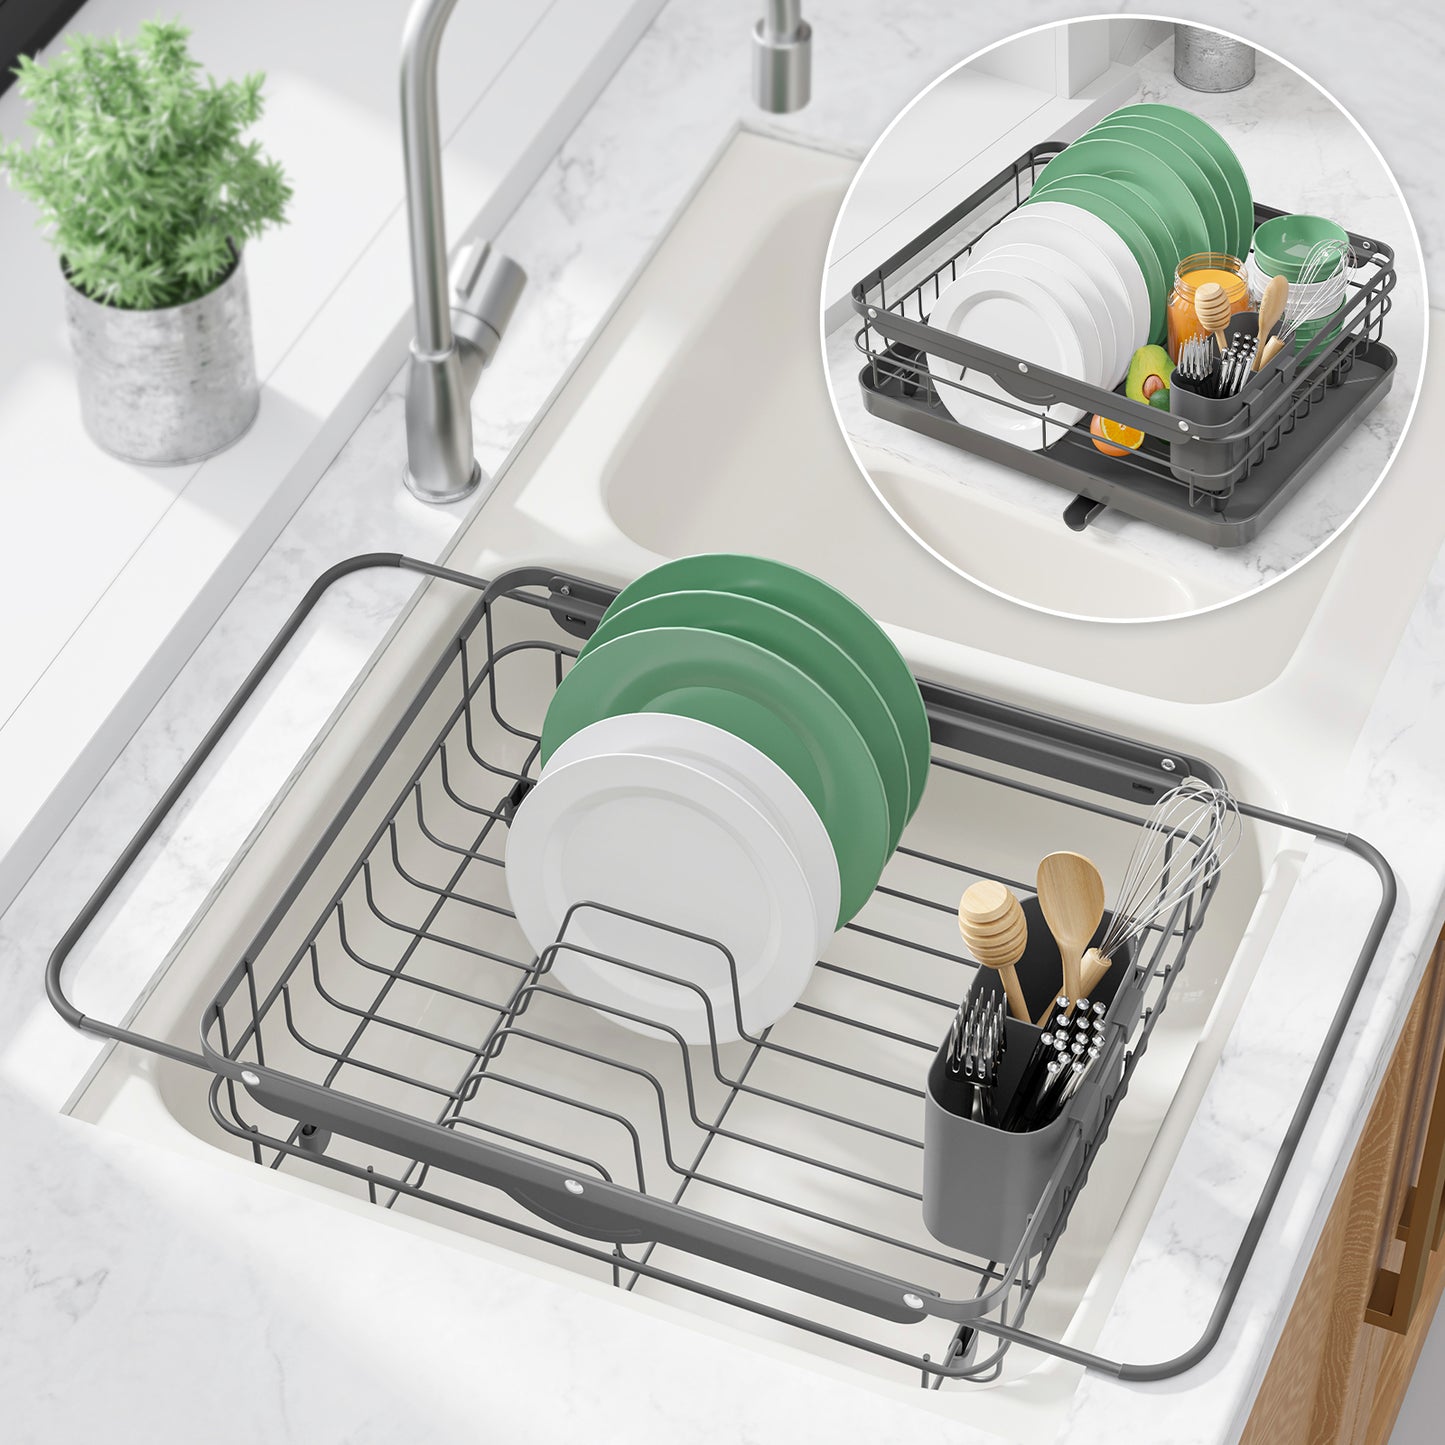 Kitsure Dish Drying Rack in Sink - Dual-Use Dish Rack for Countertops & Sinks, Stainless Steel Dish Rack for Kitchen Counter, Over The Sink Kitchen Drying Rack with a Draindboard(4003)